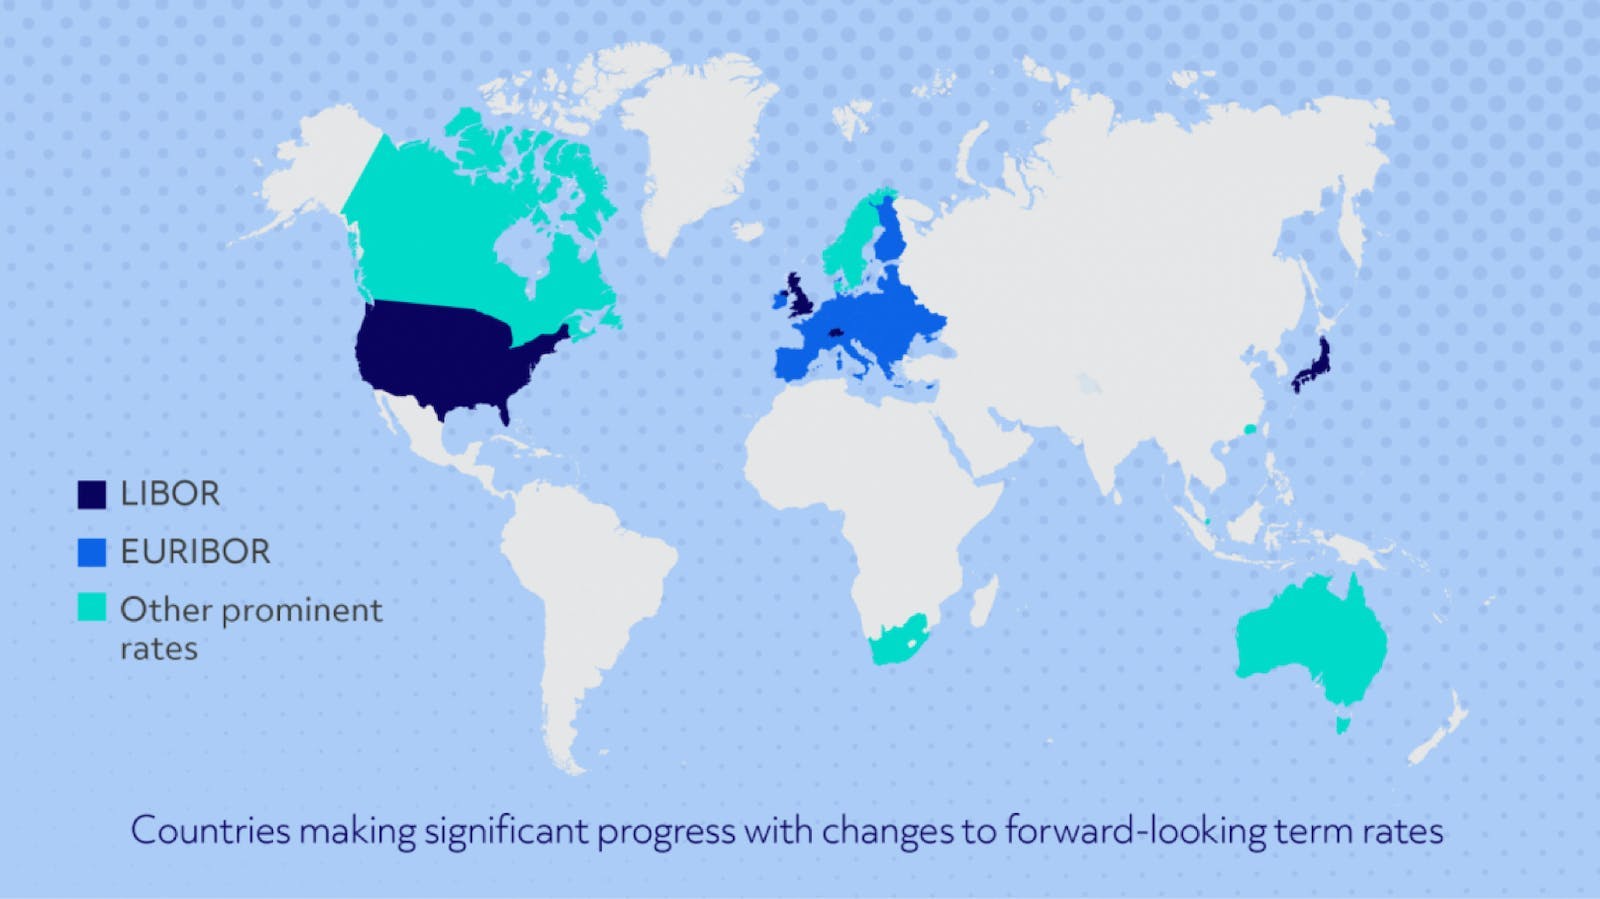 Map showing countries making significant progress with changes to forward-looking rates